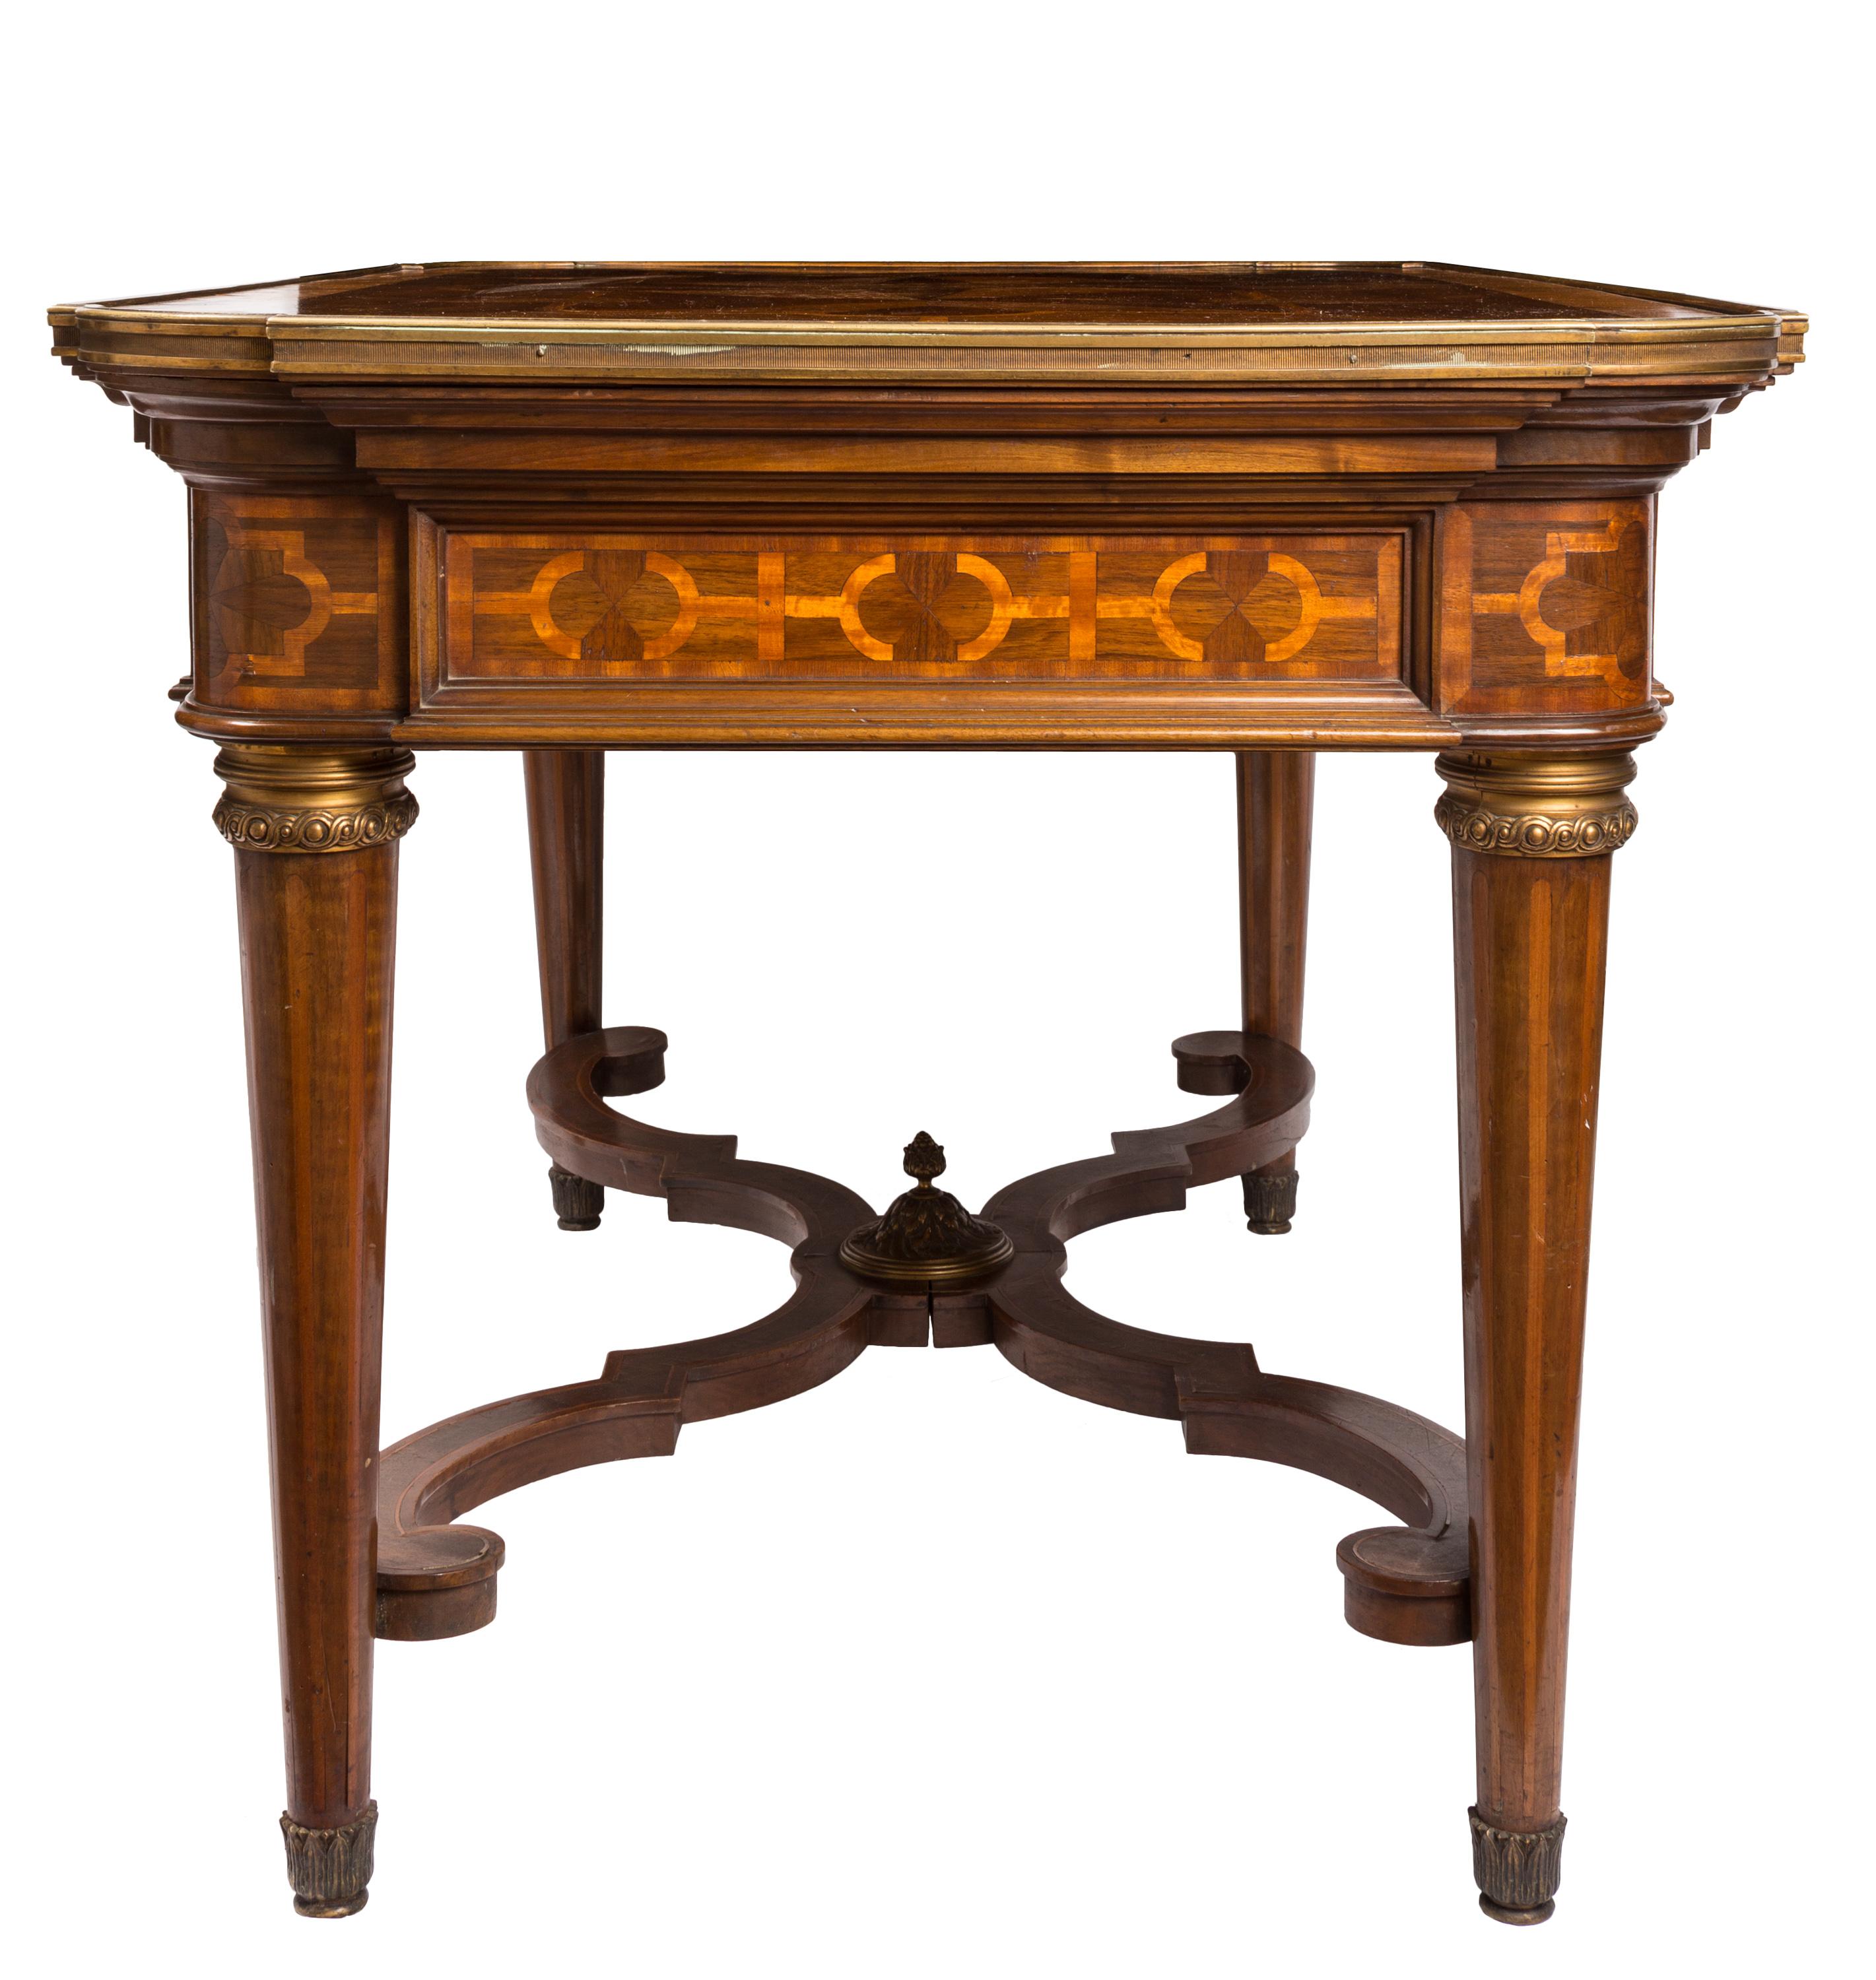 A 19th century French center table in Louis XVI style, featuring unusual geometric marquetry of various types of wood veneer on top, sides and legs. The tabletop is edged with a brass molding, and each tapered leg features a decorative brass collar